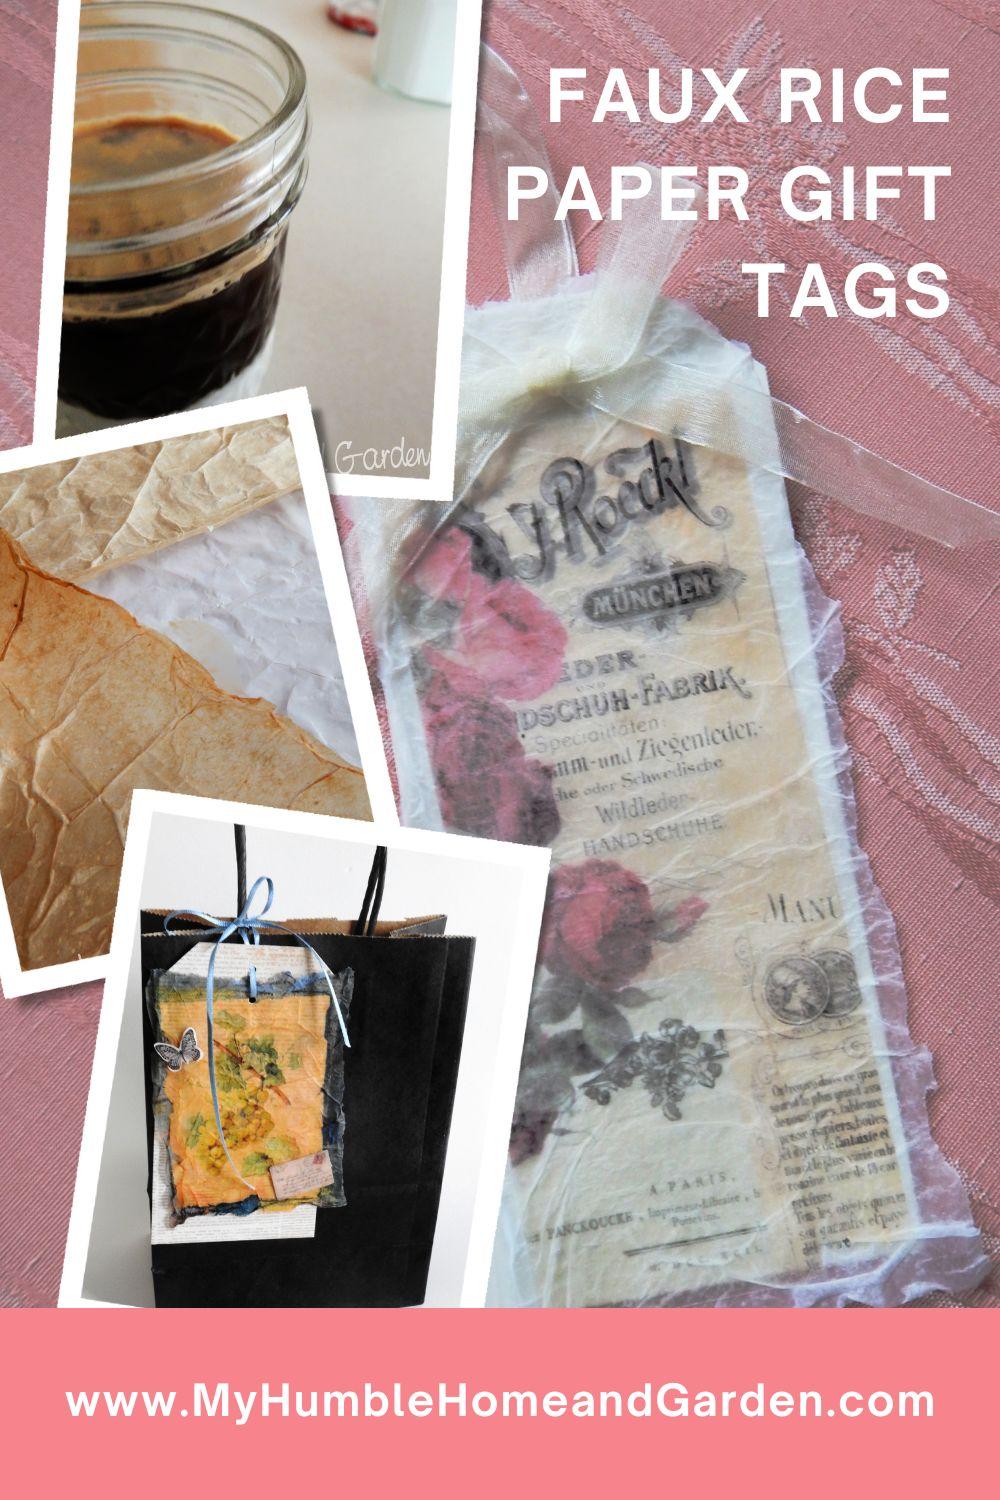 Choosing The Right Paper  My Guide To Cardstock for Favor Tags